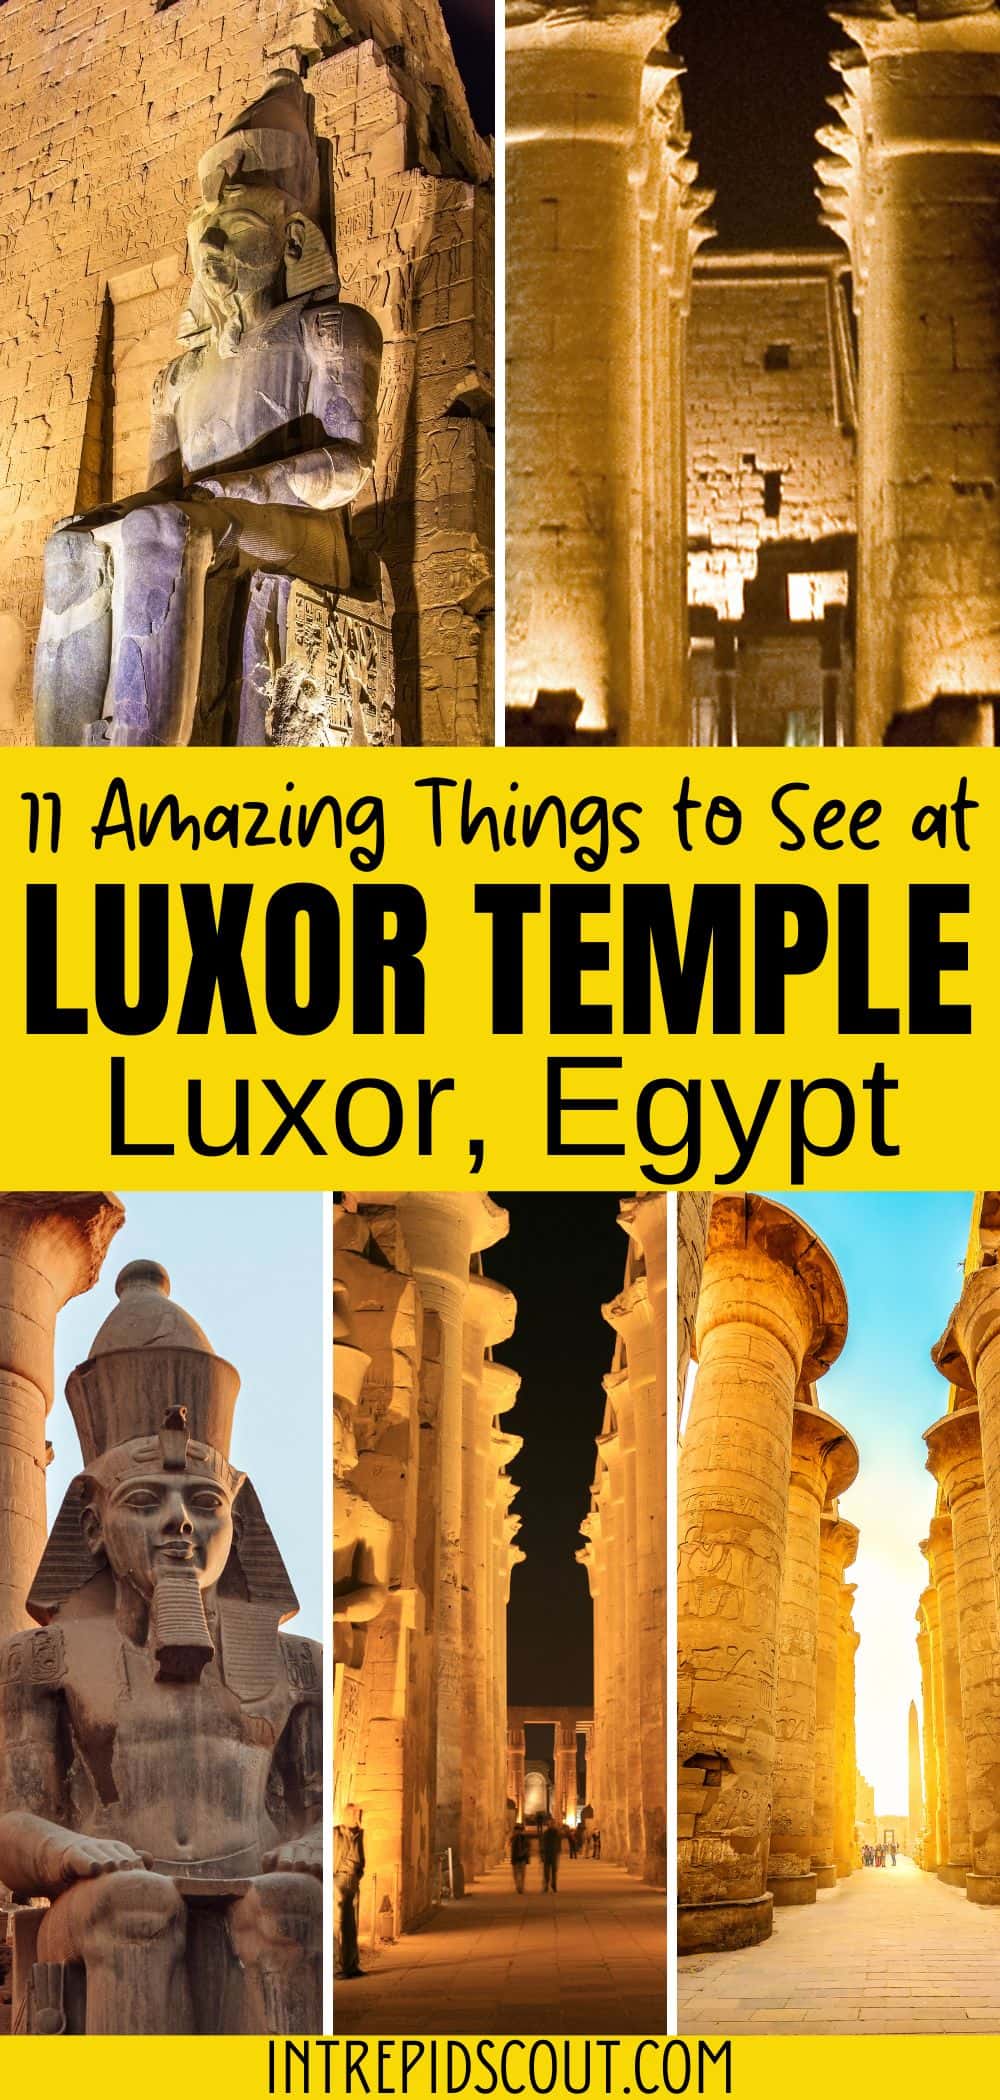 Things to See at Luxor Temple